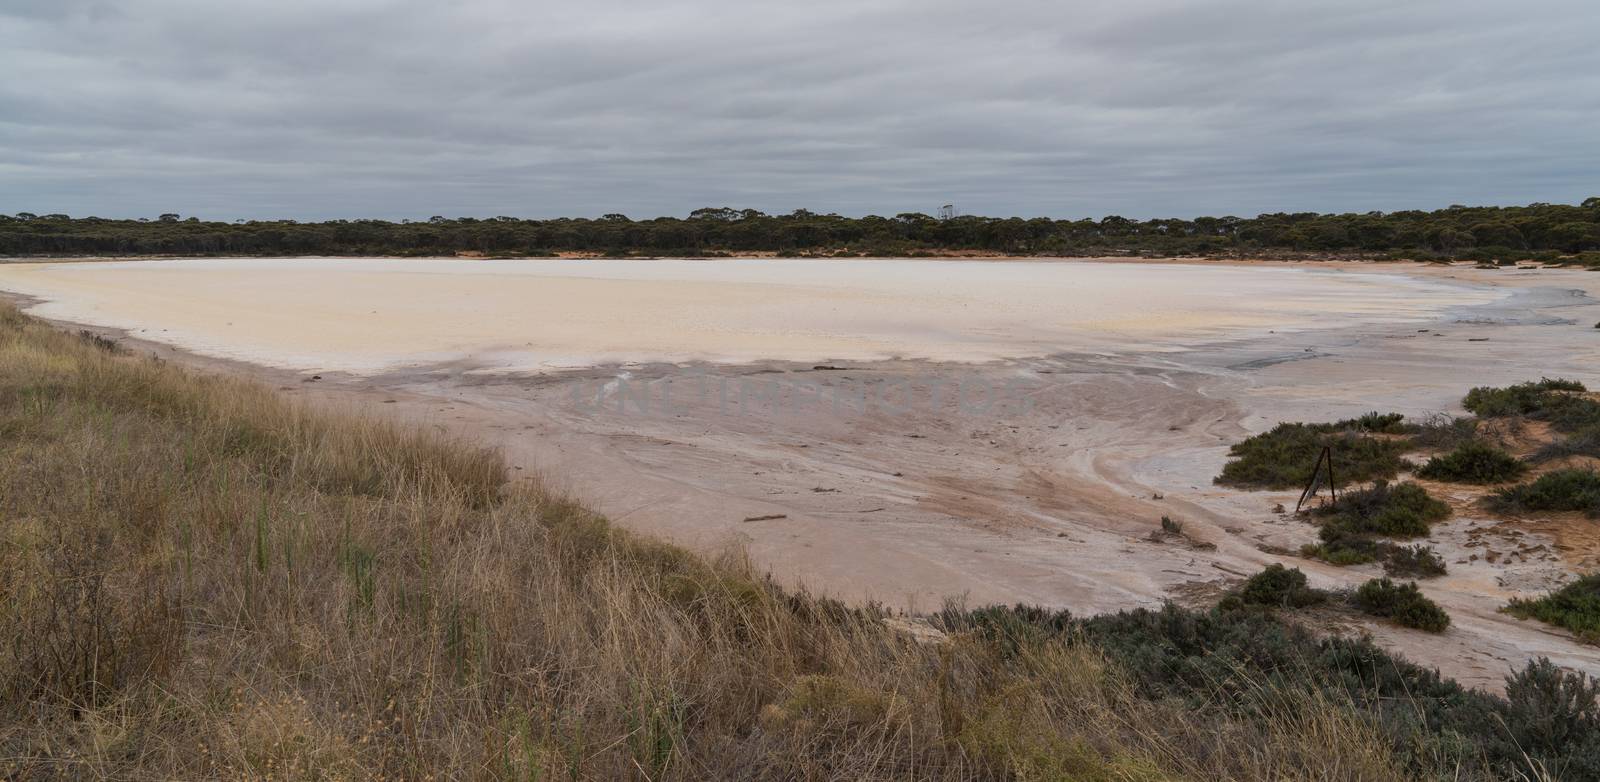 Landscape with salt lakes on an overcast day in Western Australia